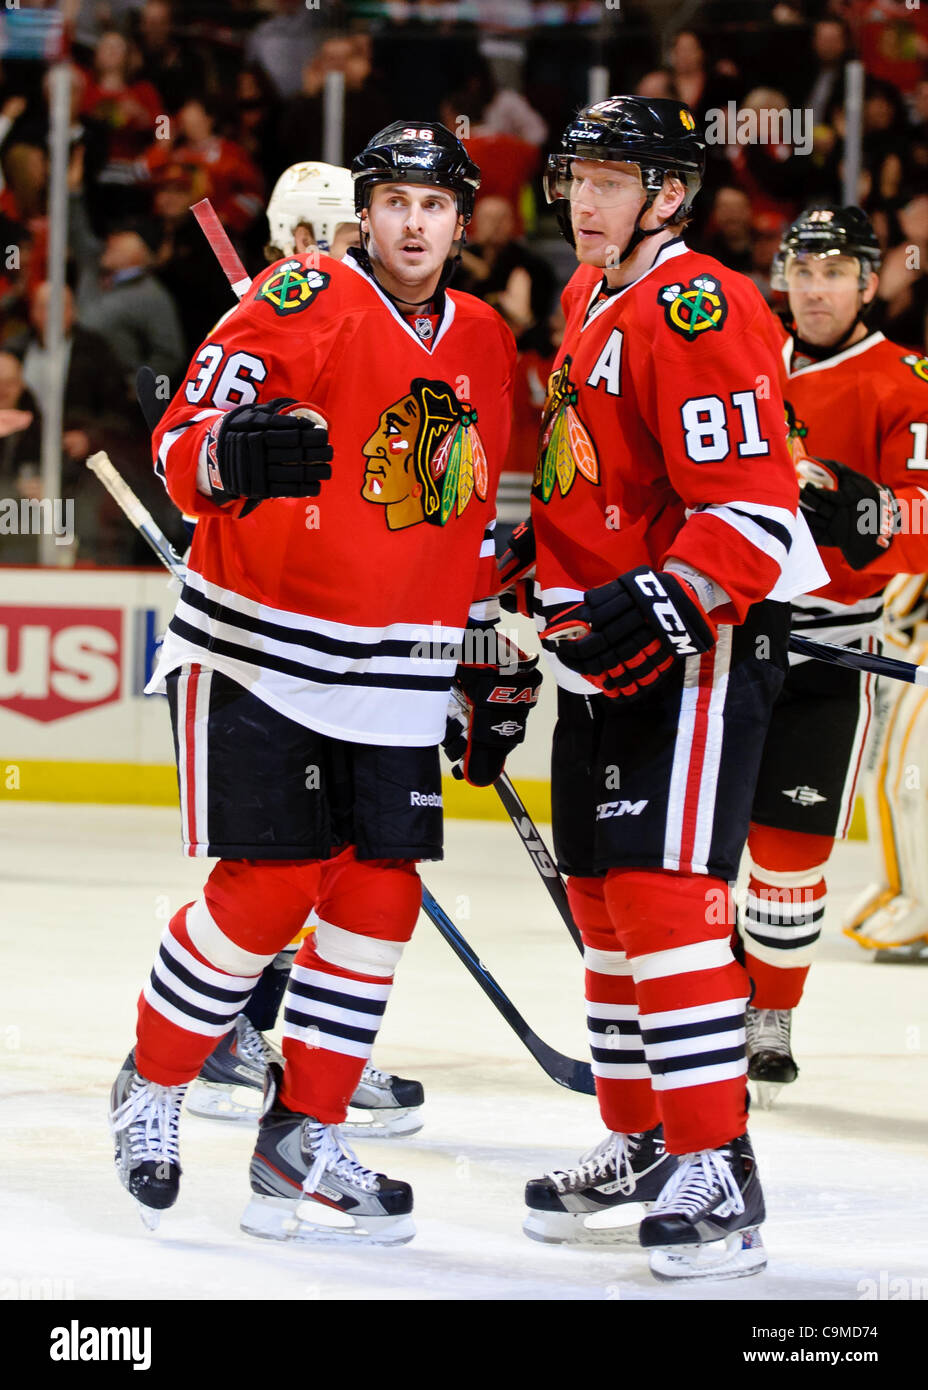 Jan. 24, 2012 - Chicago, Illinois, U.S - Chicago center Dave Bolland (36) is congratulated by right wing Marian Hossa (81) after his 3rd period goal during the NHL game between the Chicago Blackhawks and the Nashville Predators at the United Center in Chicago, IL. The Predators defeated the Blackhaw Stock Photo